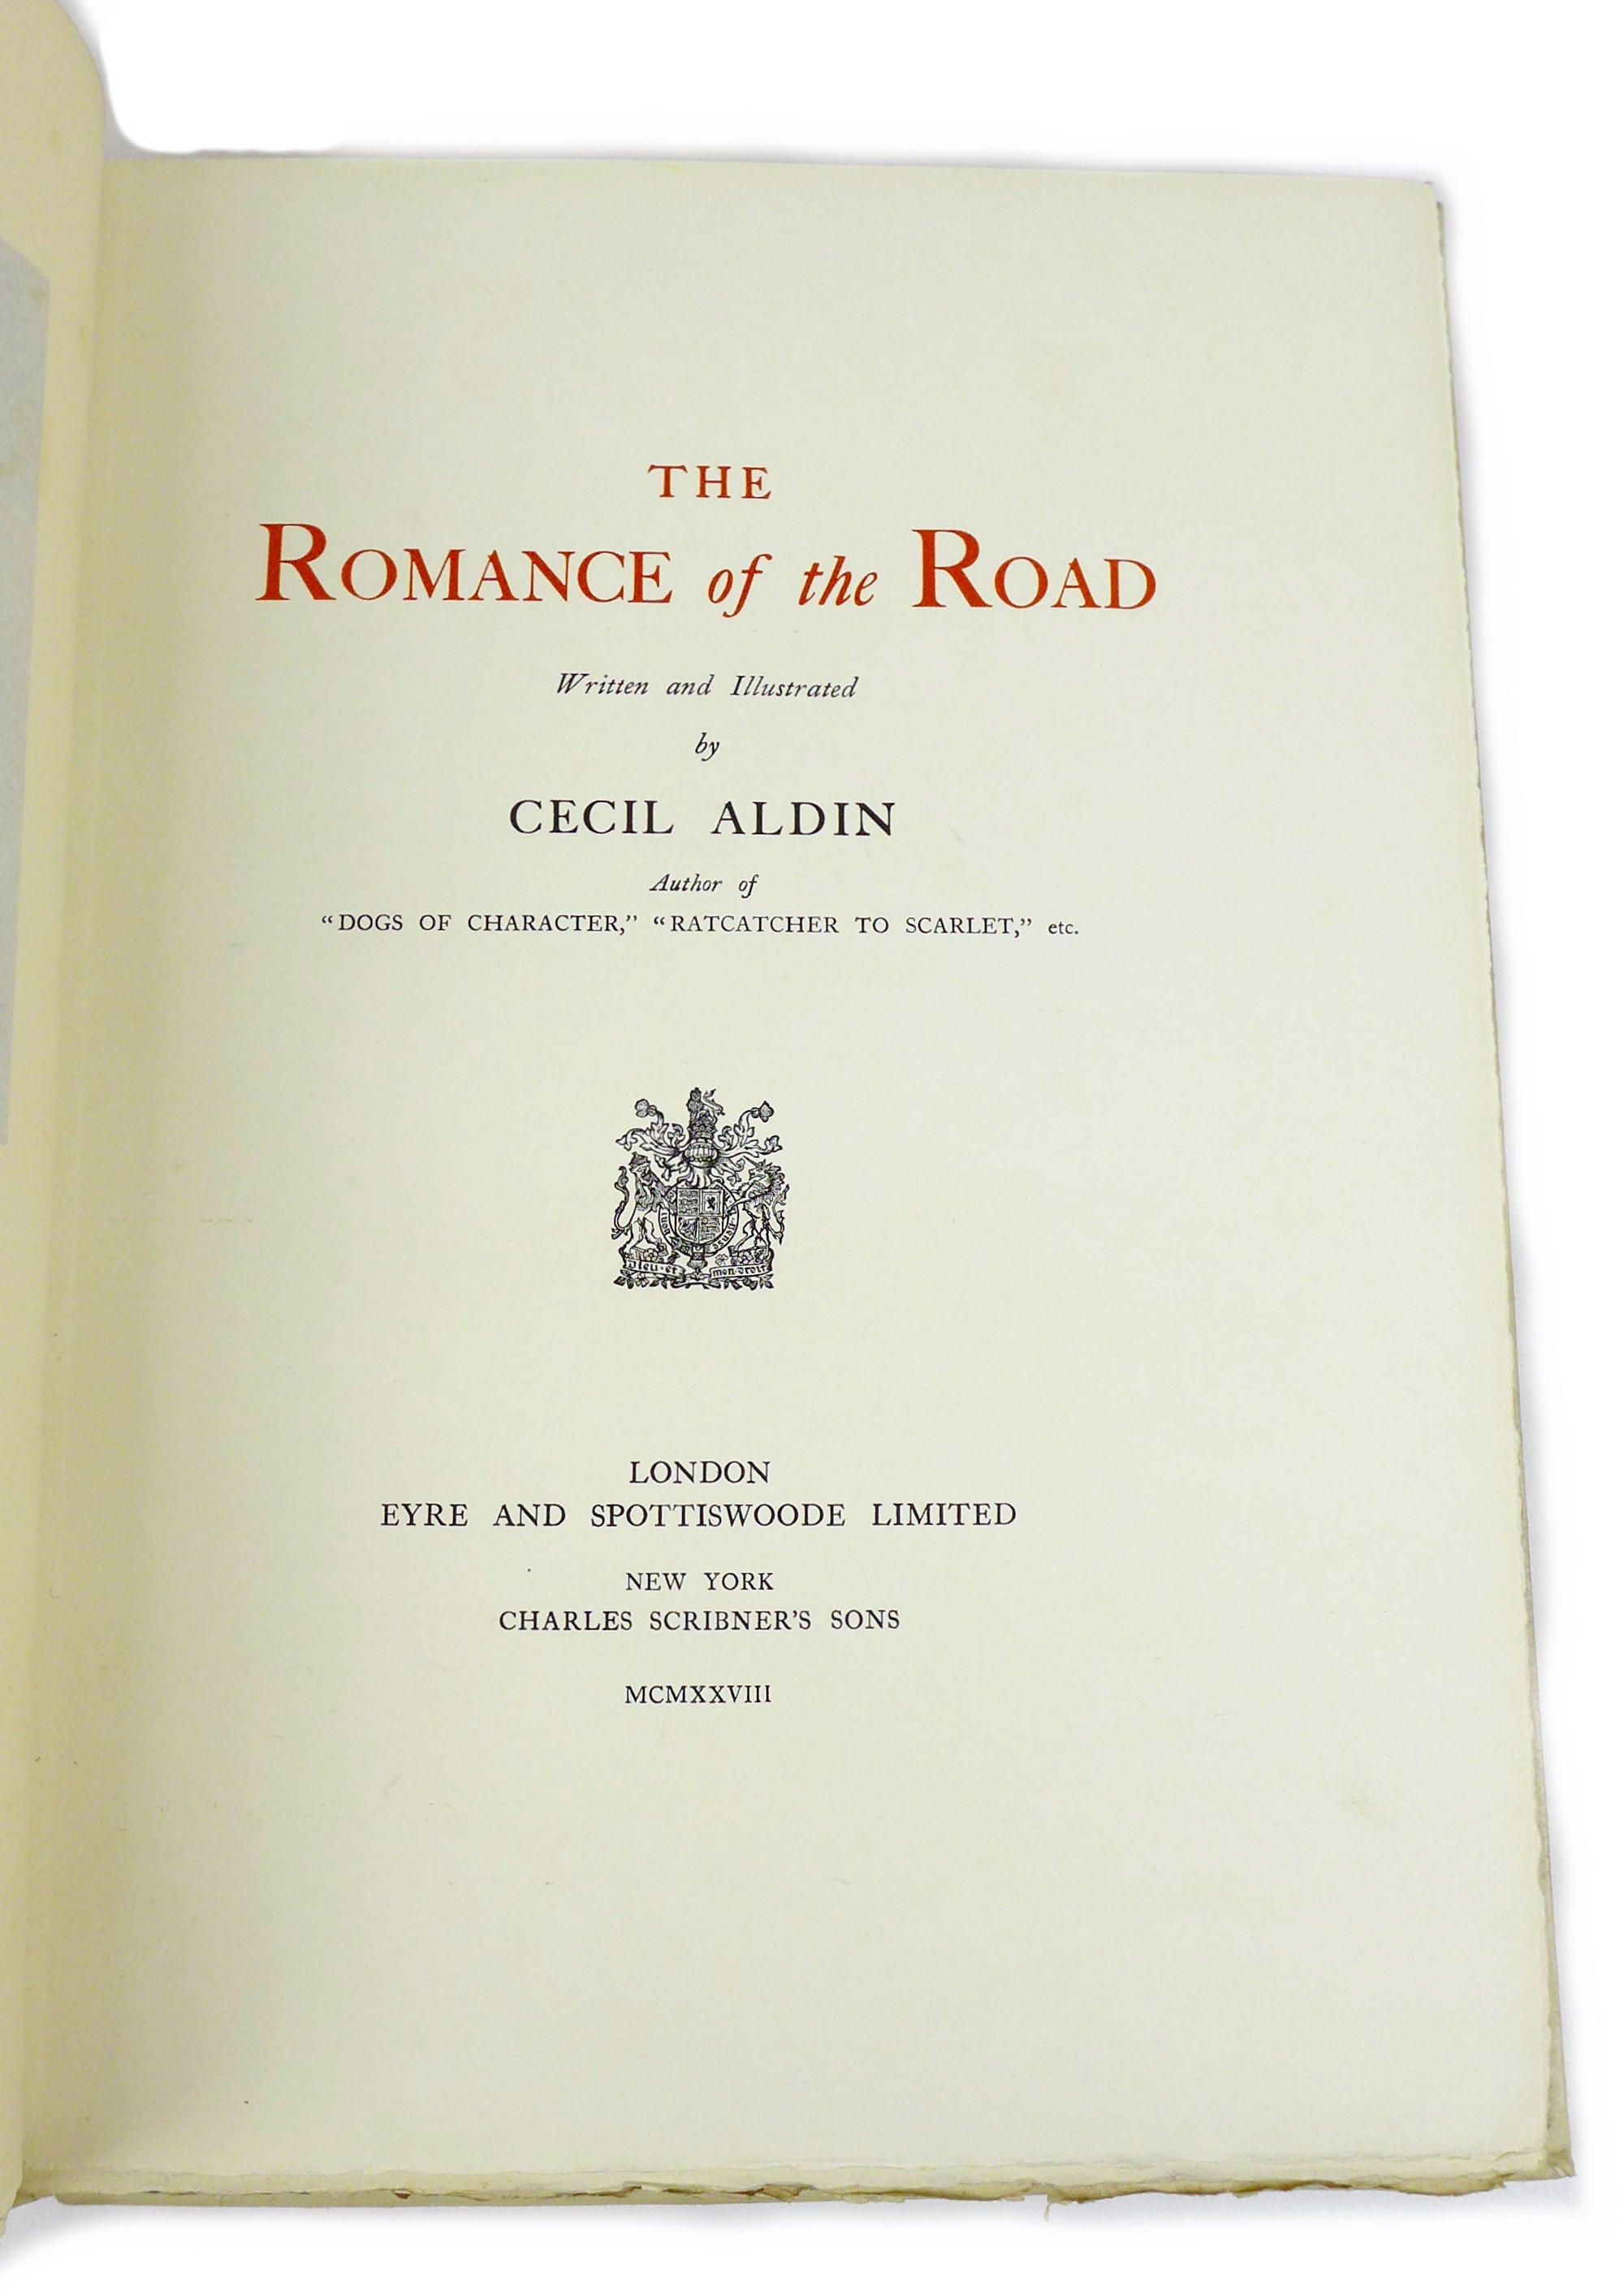 Cecil Aldin 'Romance of the Road' one of a limited edition of 200 books, signed by author - Image 2 of 3